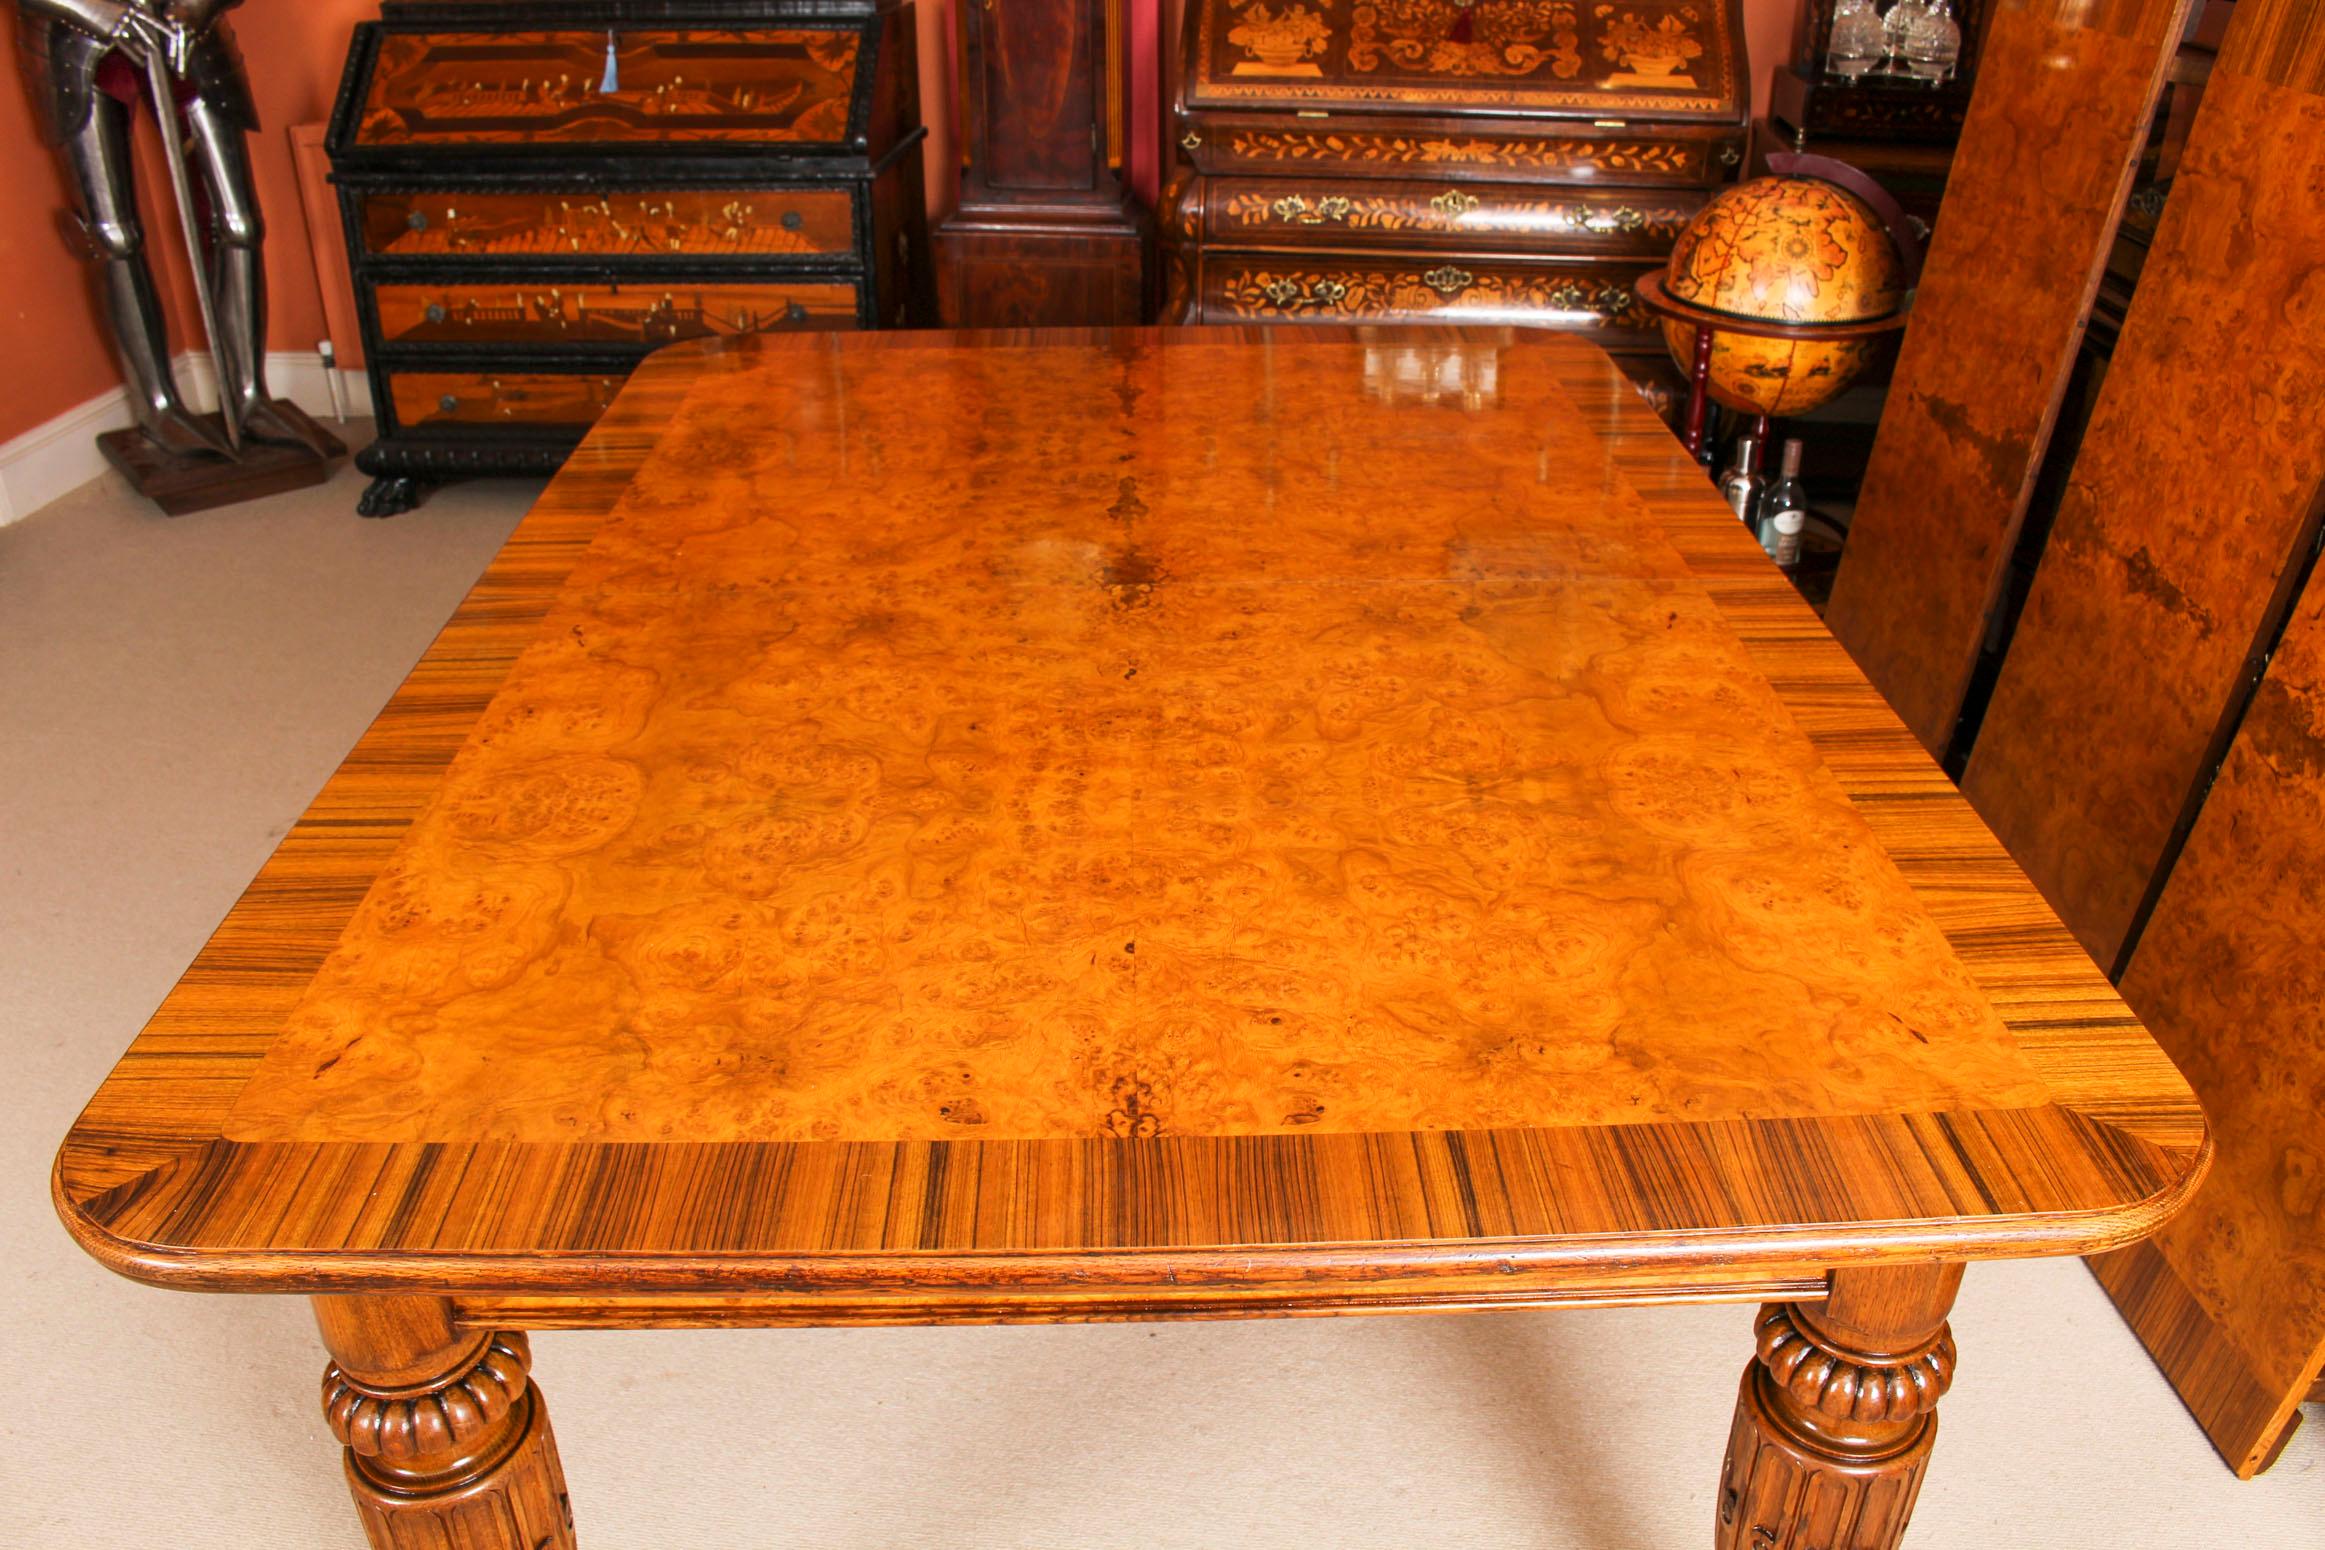 There is no mistaking the style and sophisticated design of this exquisite rare English antique Victorian pollard oak extending dining table, circa 1860 in date. This stunning dining table will Stand out in your dining or conference room and will